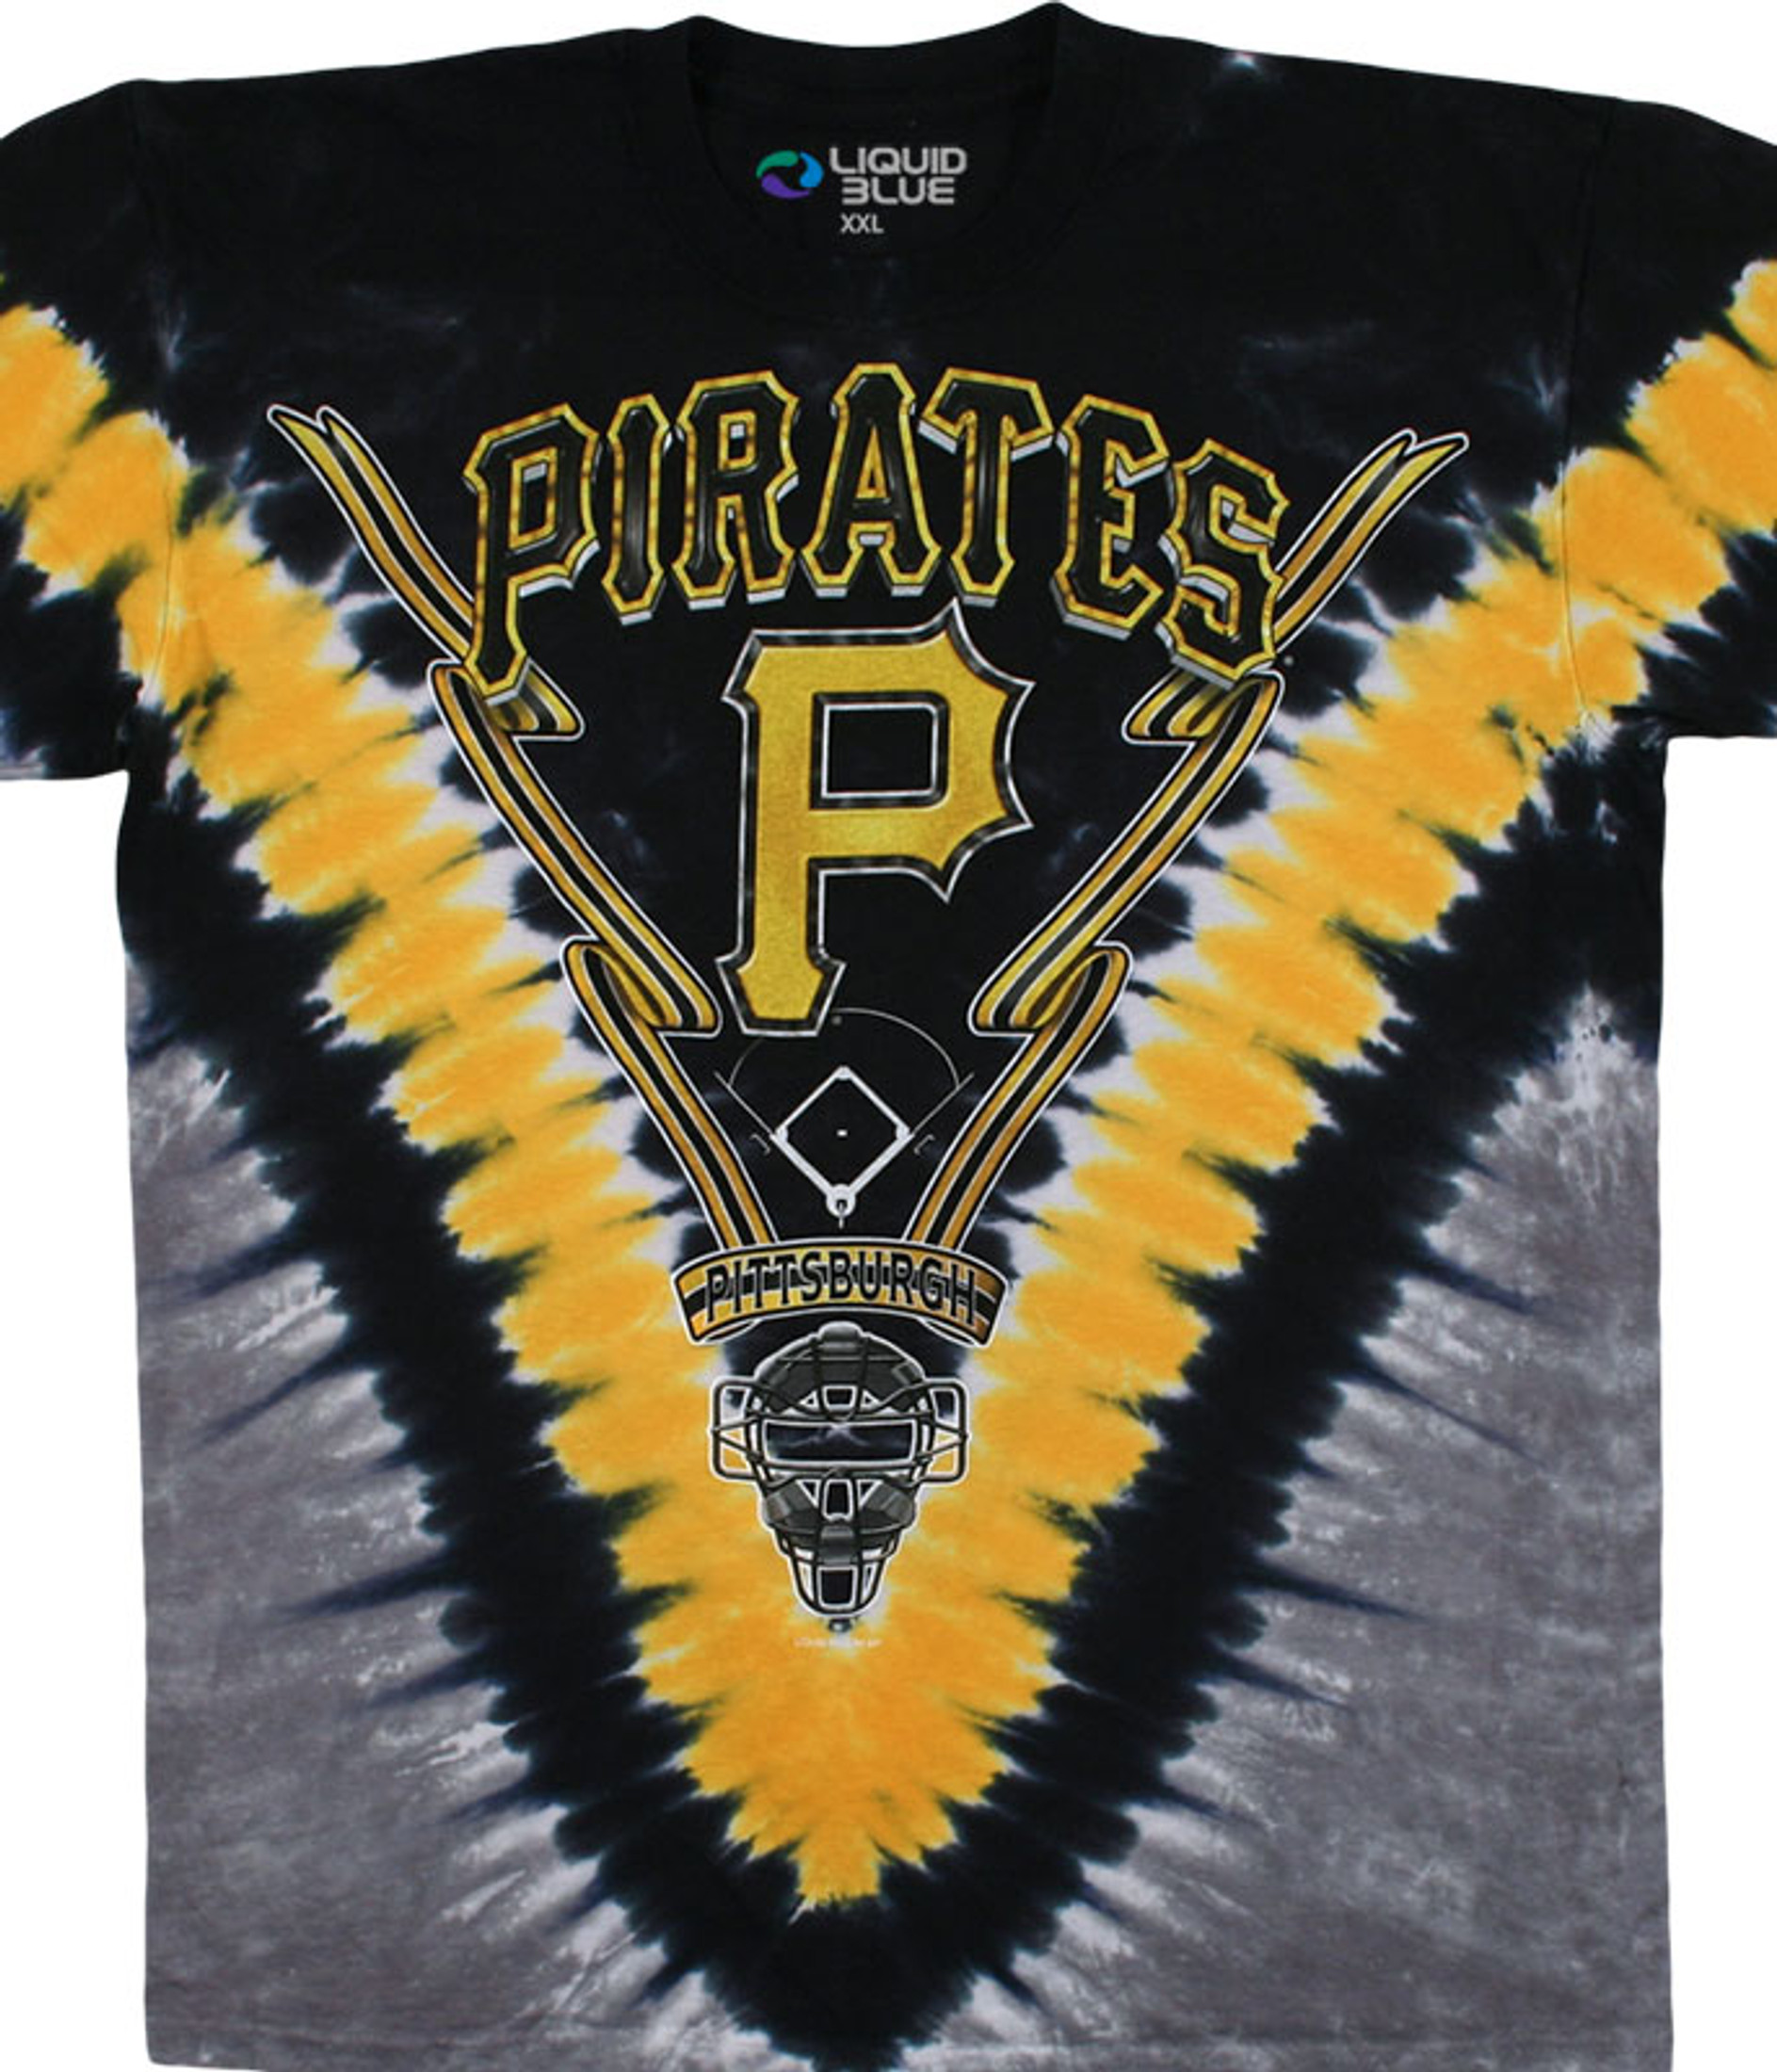 Pittsburgh Pirates Steal Your Base Tie-Dye T-Shirt